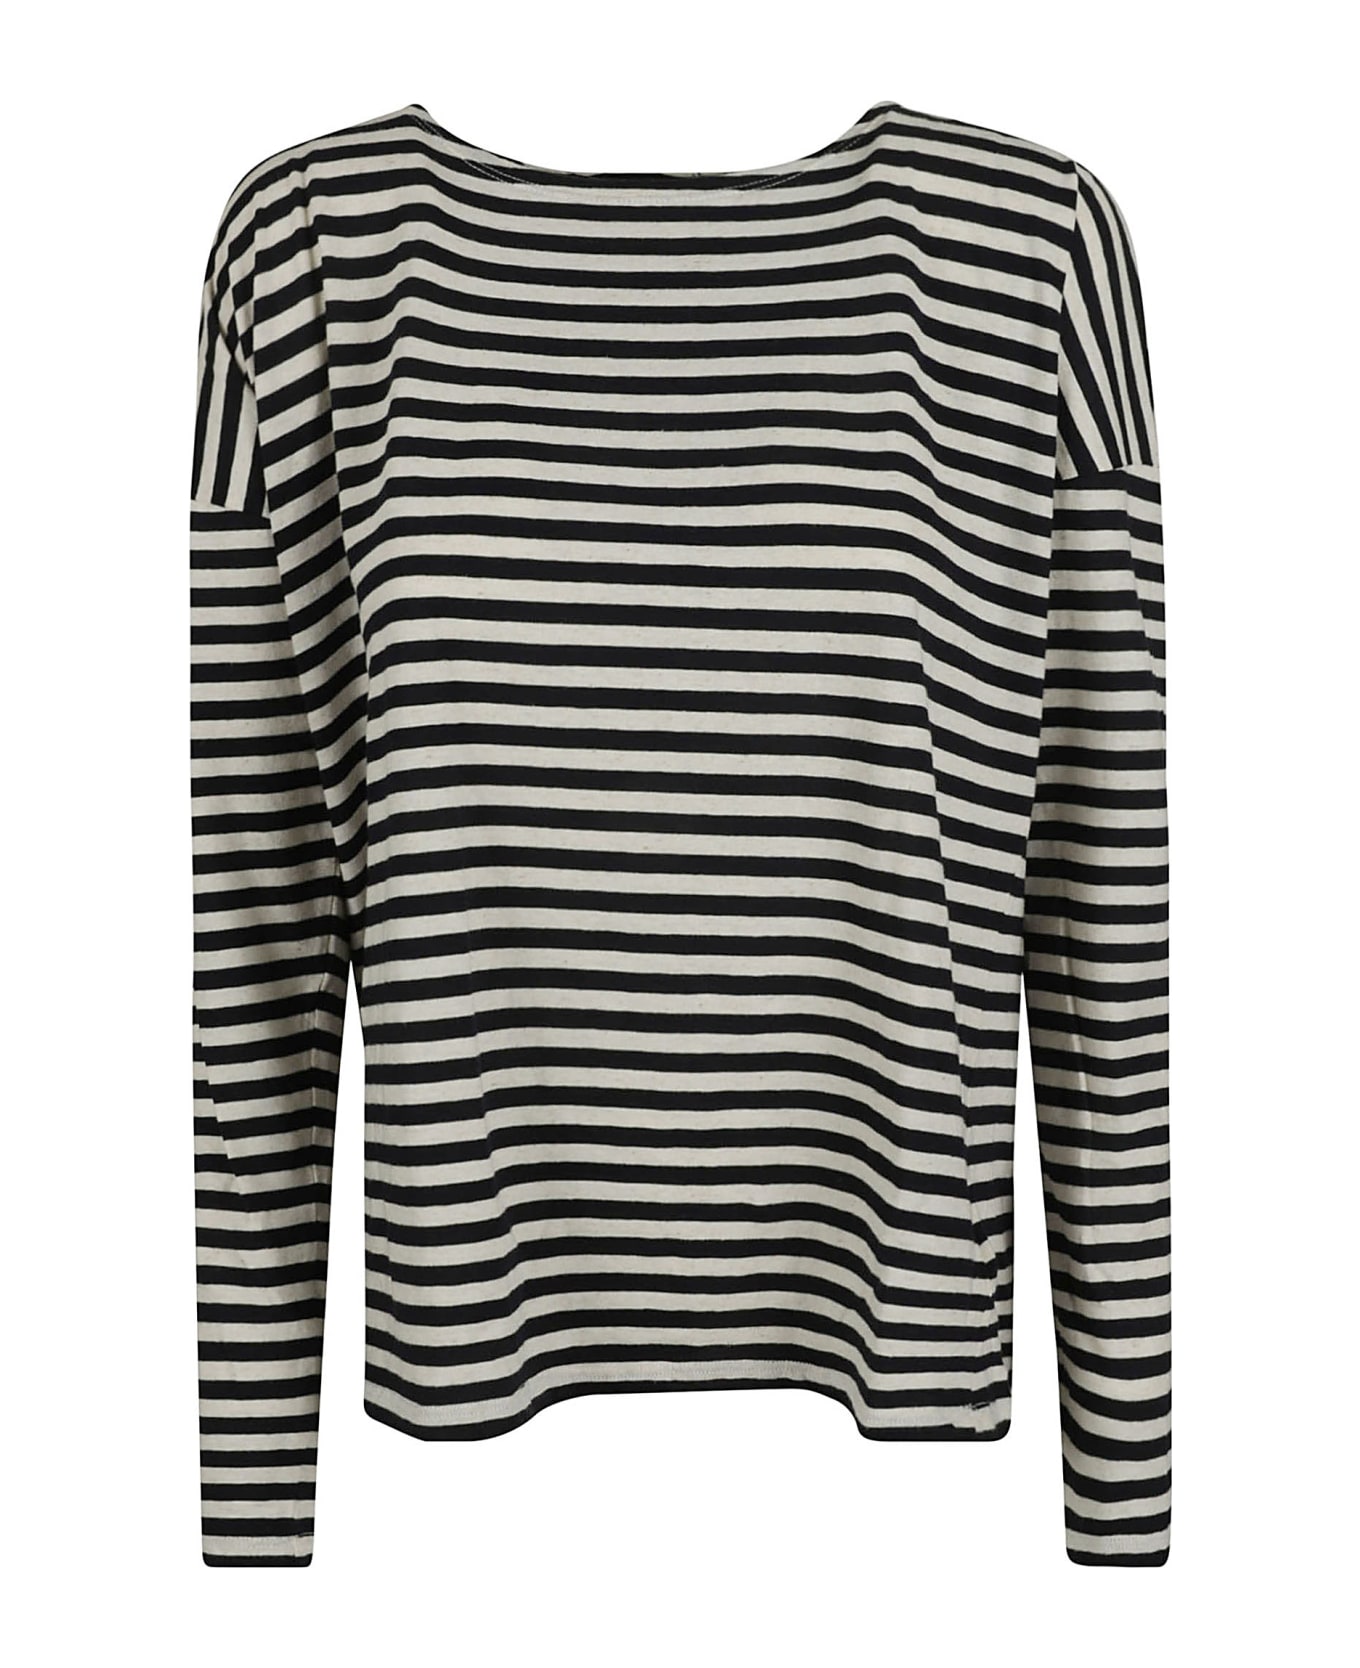 Phisique du Role Pinstripe Long-sleeved T-shirt - Blue/Ivory